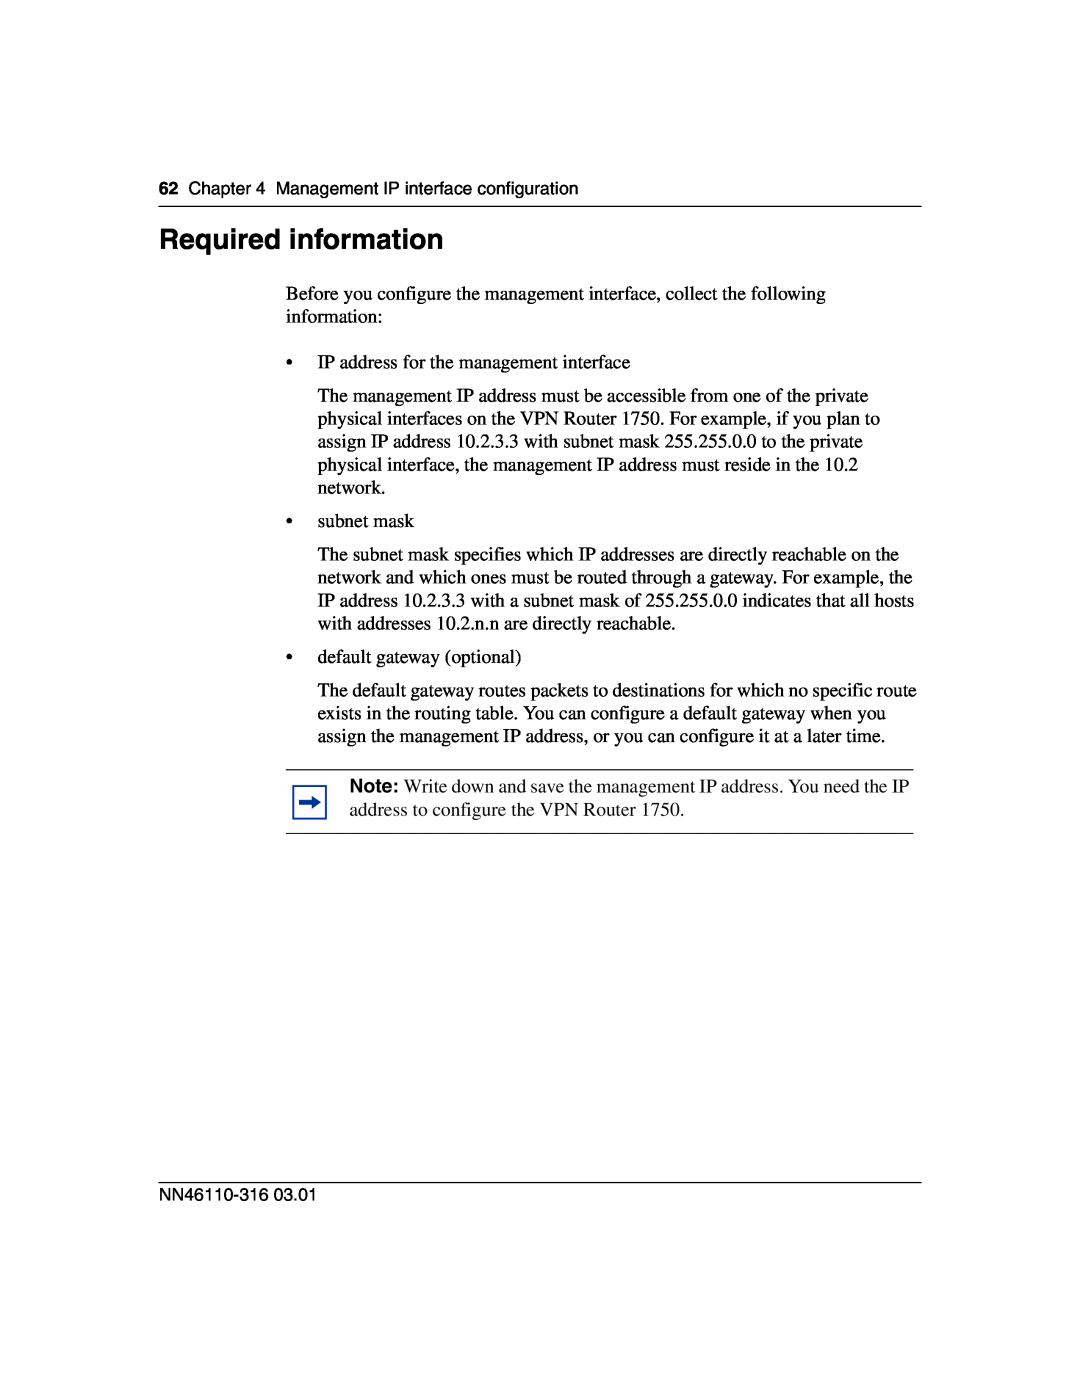 Nortel Networks 1750 manual Required information 